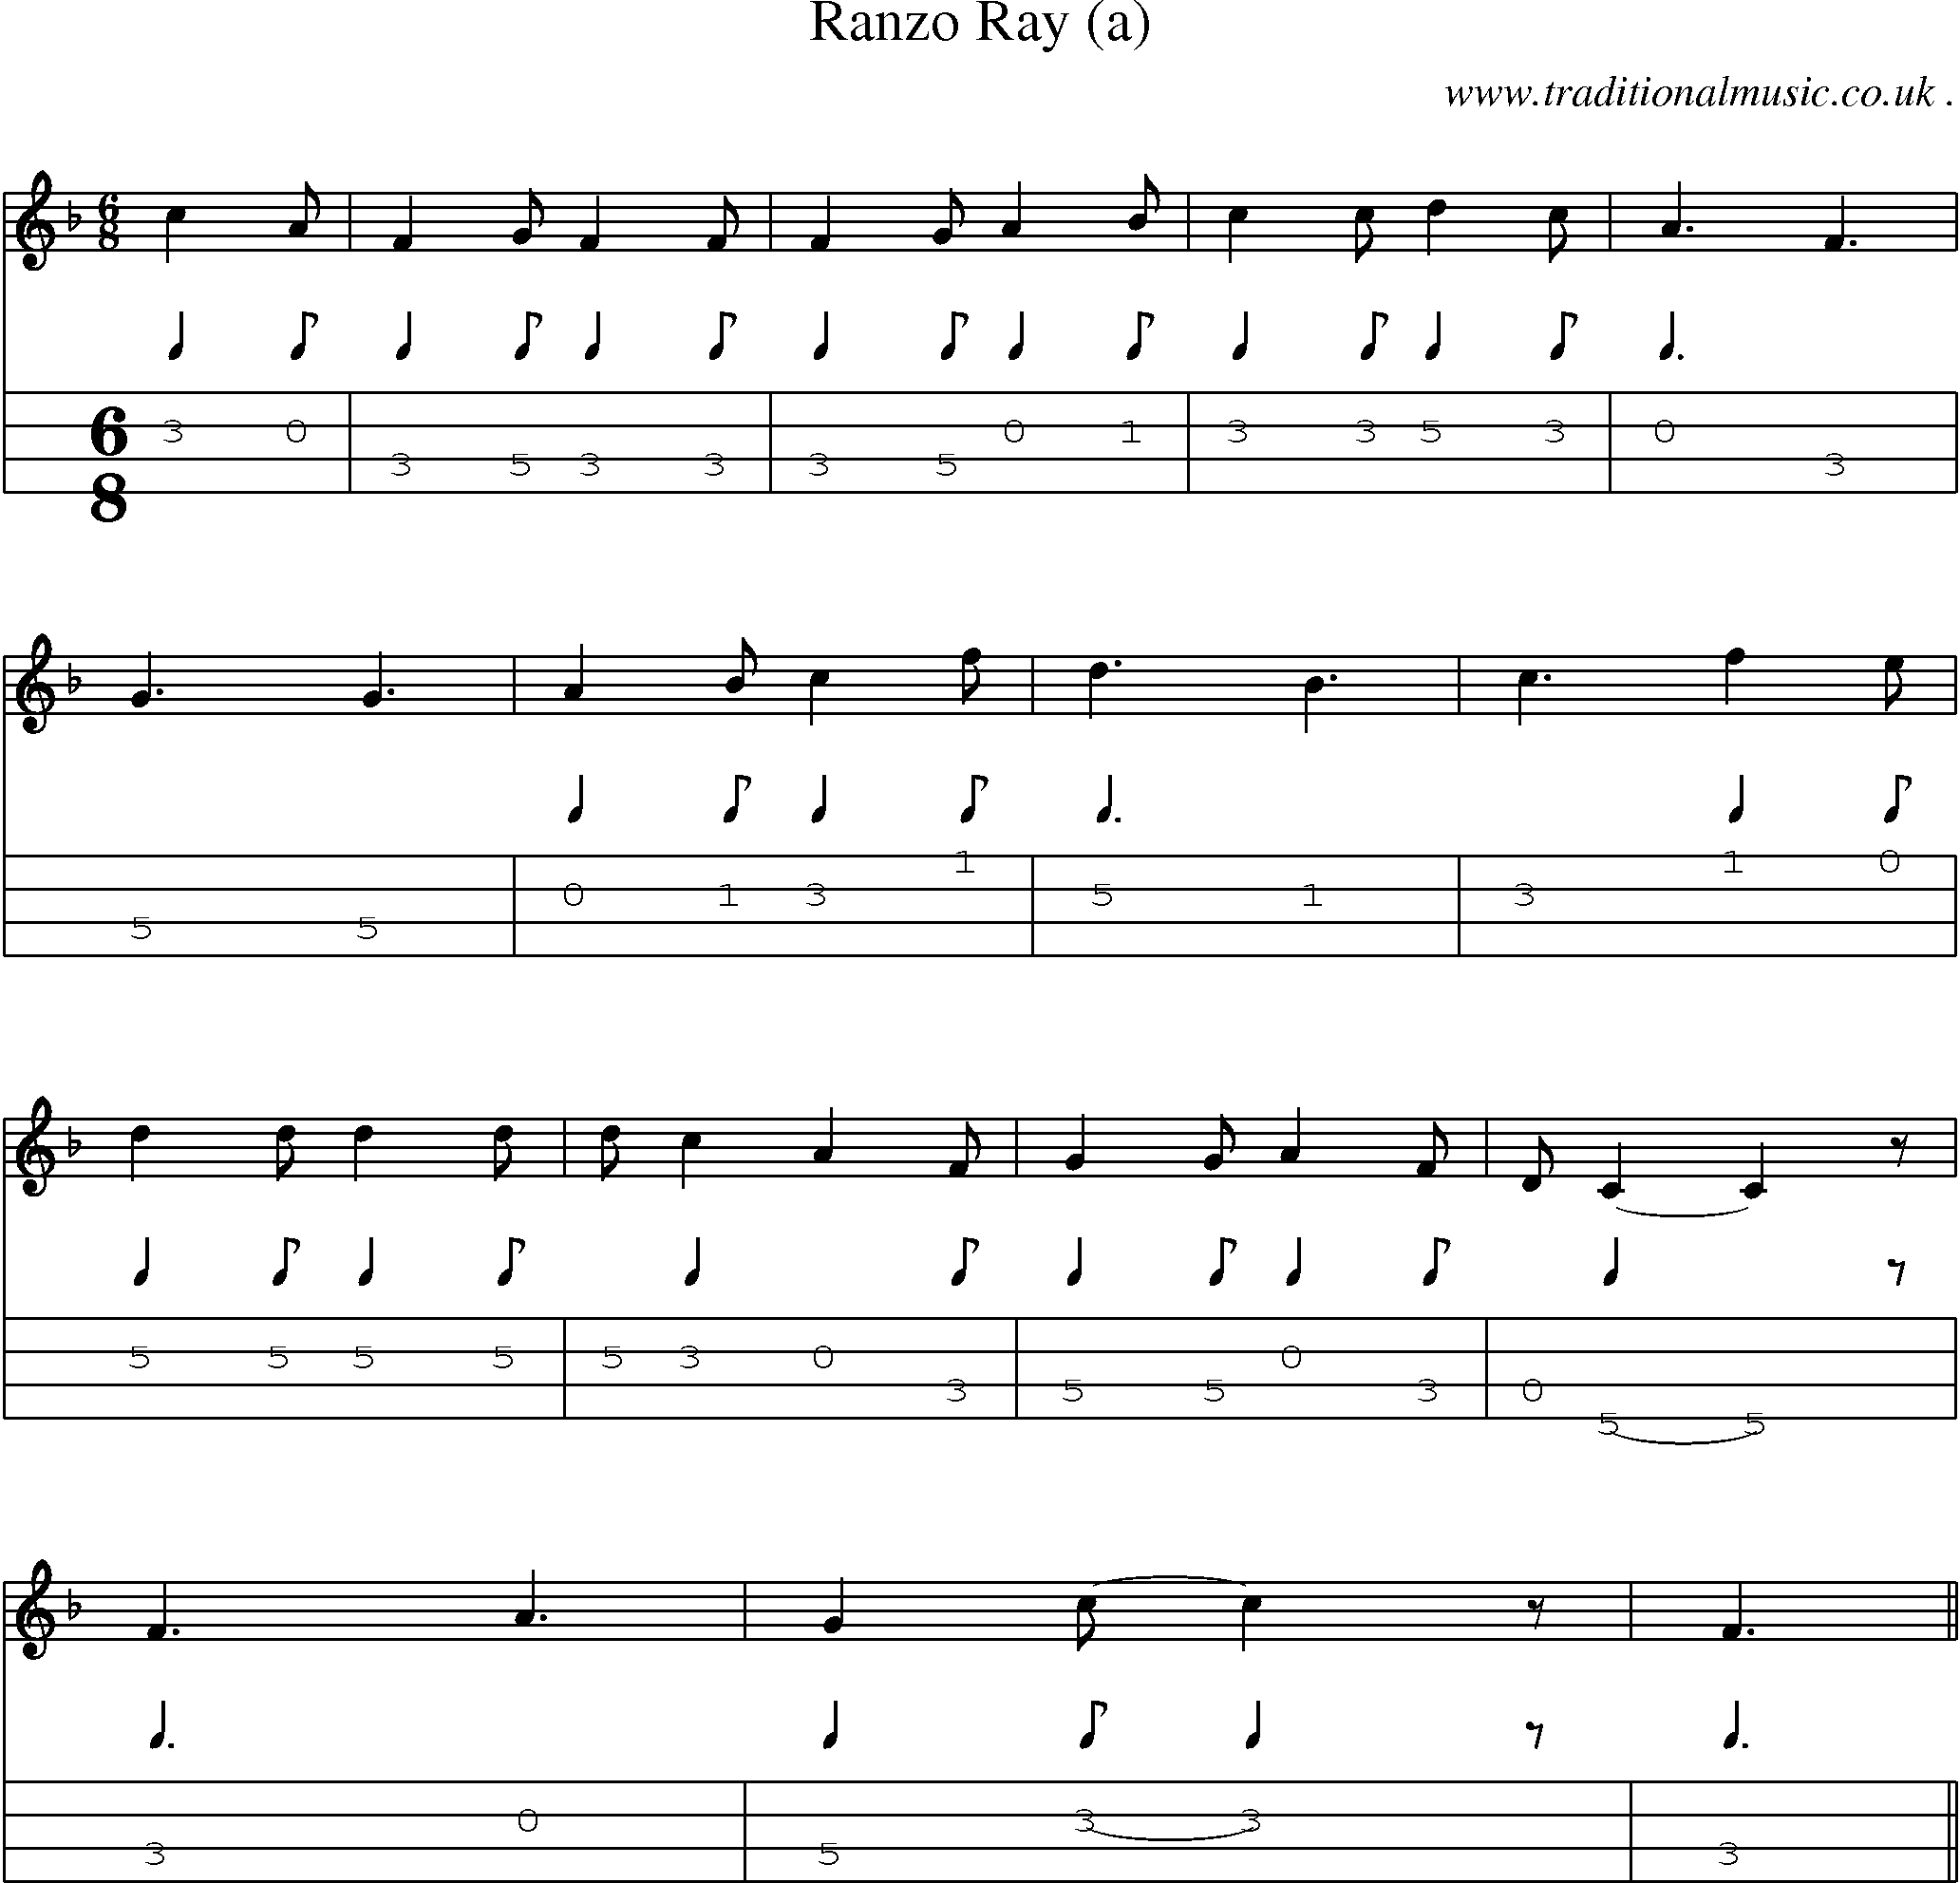 Sheet-Music and Mandolin Tabs for Ranzo Ray (a)